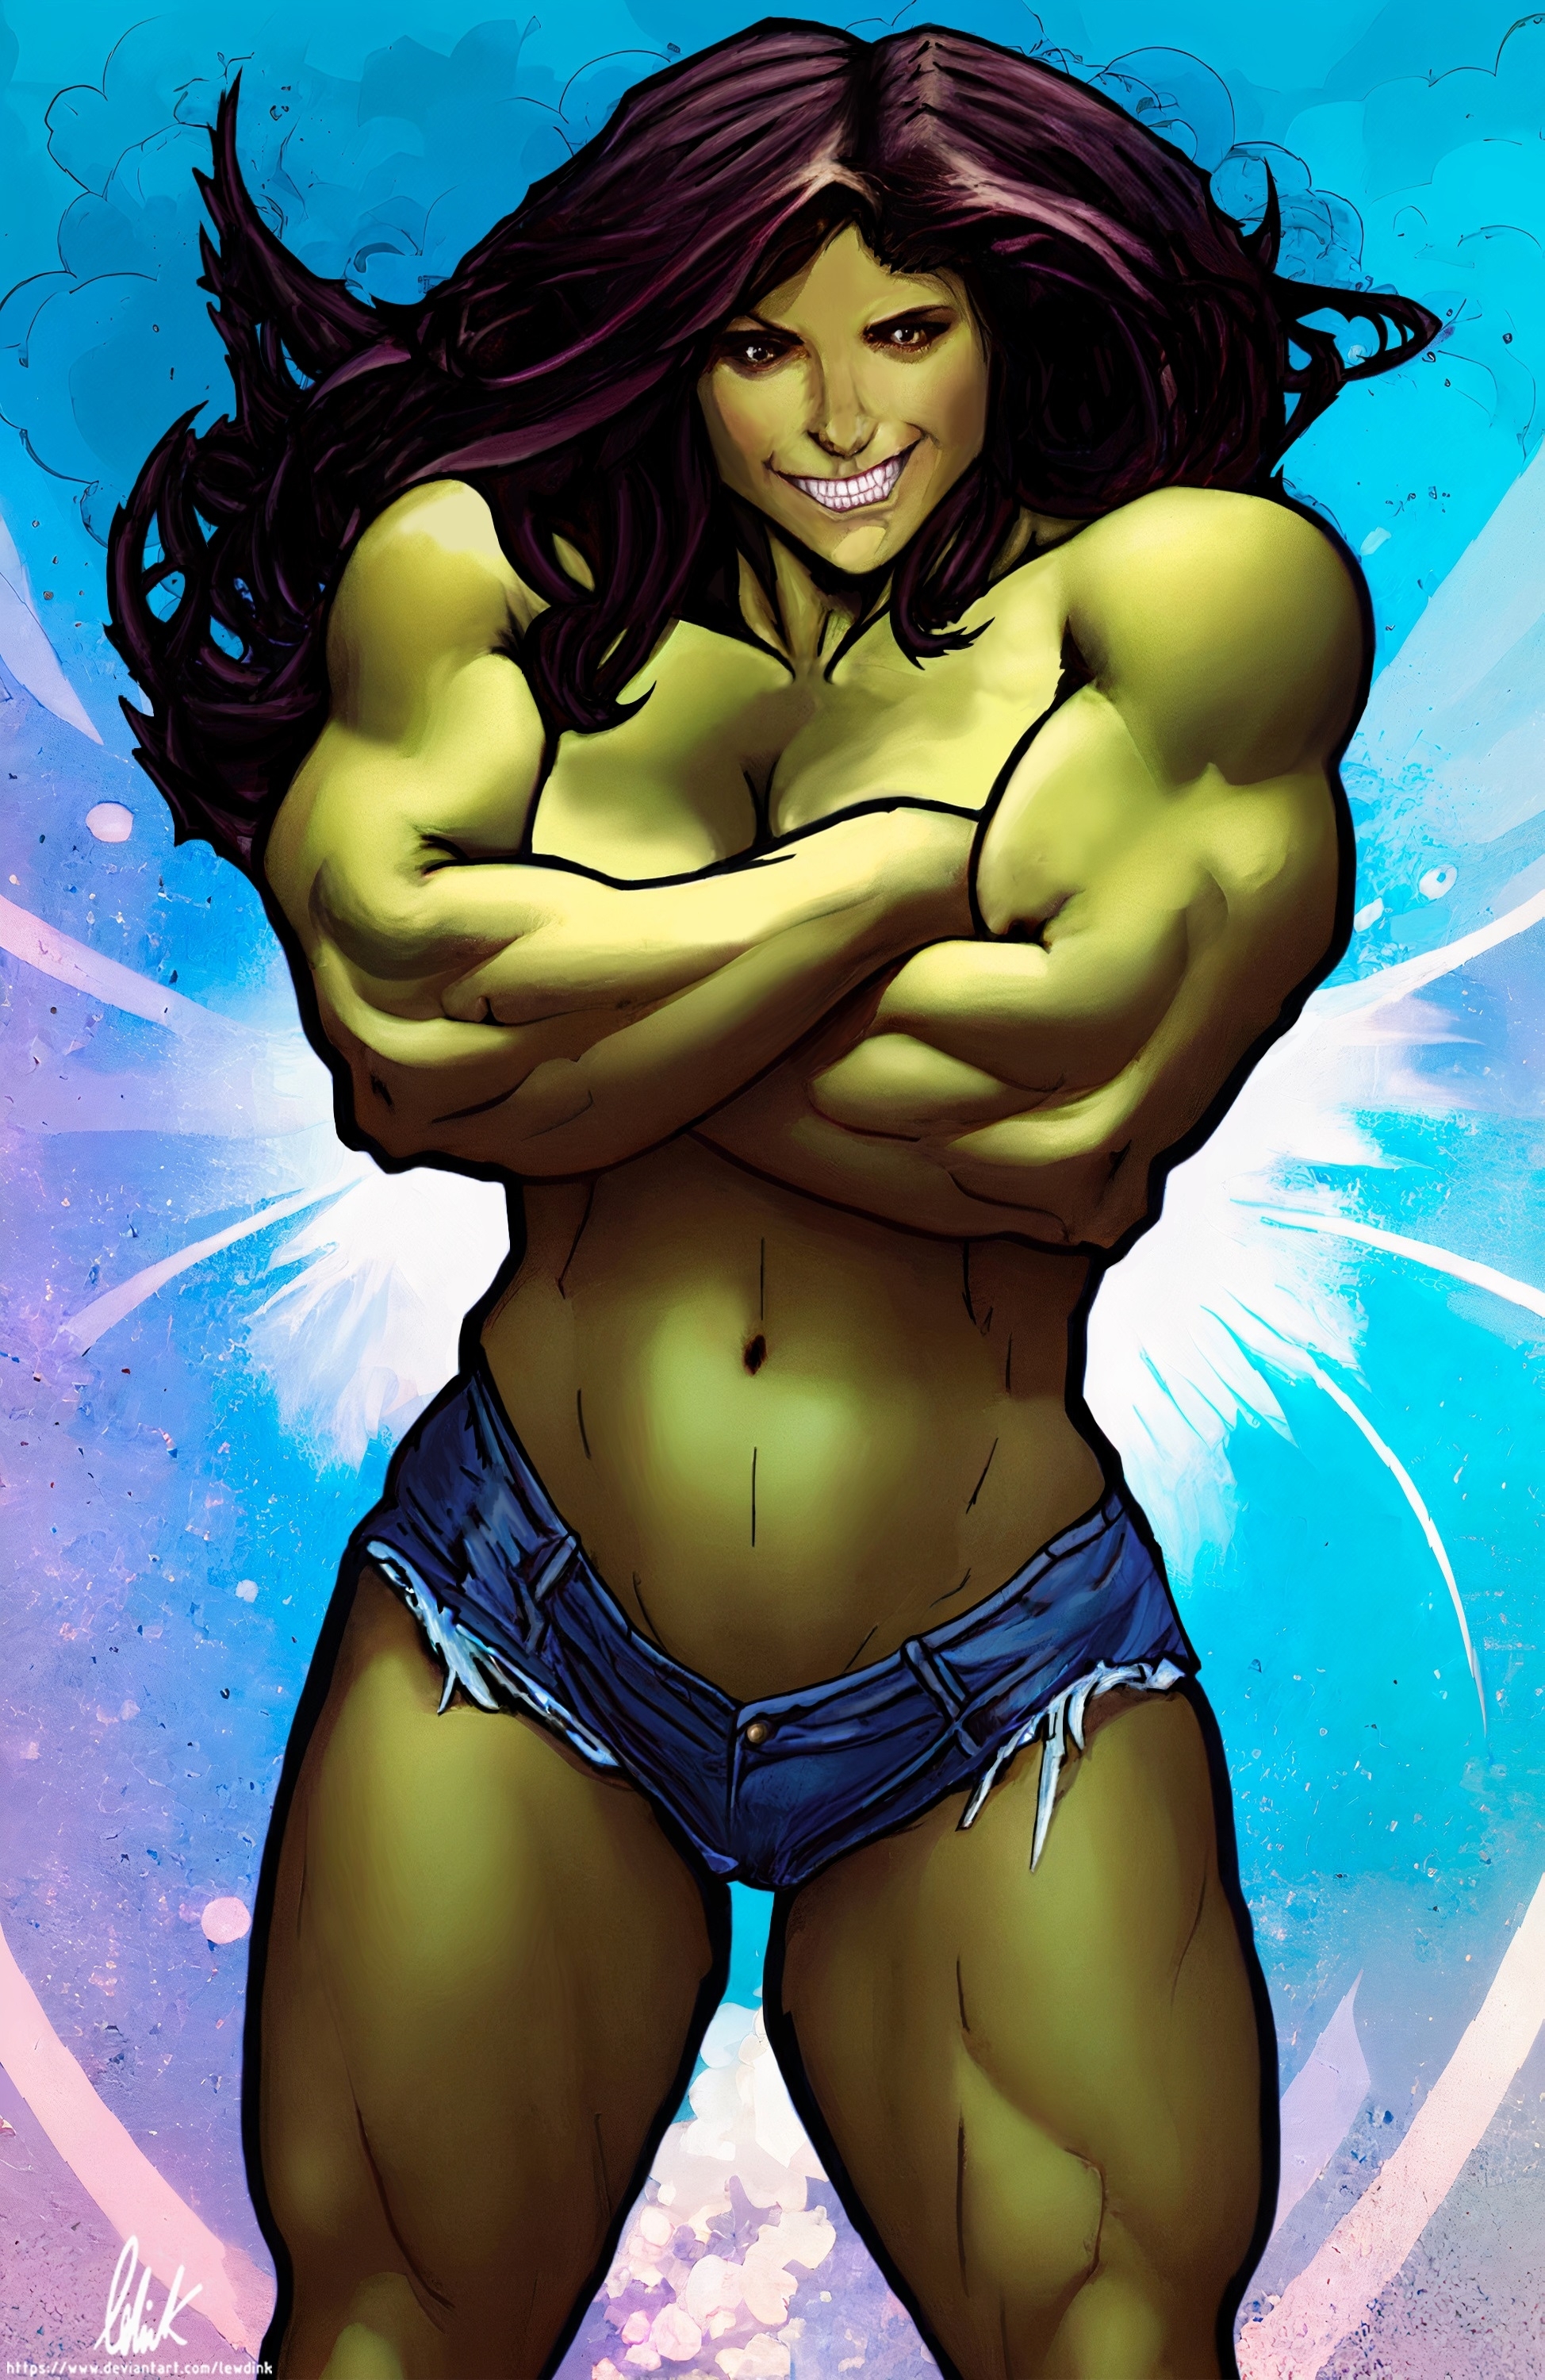 She-Hulk Pinup She-hulk Hulk Marvel Muscular Girl 3d Porn 3d Girl 3dnsfw 3dxgirls Abs Sexy Hot Bimbo Huge Boobs Huge Tits Muscles Musclegirl Pinup Perfect Body Fuck Hard Sexyhot Sexy Ass Sexy Woman Fake Tits Lips Latex Flexible Smirking Big Tits Huge Ass Big Booty Booty Fit Fitness Thicc Mom Milf Mature Mature Woman Spread Legs Spread Thick Thighs Horny Face Short Hair Hardcore Curvy Big Ass Big boobs Big Breasts Big Butt Brown Eyes Cleavage Fishnet Stockings Fishnet Nipple Piercing Piercing Belly Button Piercing Leather Jacket Thighs Jewels Pawg Ass Red head Tribal Weapon Armor Nude Boobs Pregnant Big Balls Big Nipples Lingerie Sexy Lingerie Womb Tattoo Face Tattoo Slut Whore Bitch Comic Hotpants Shorts Long Hair Smile